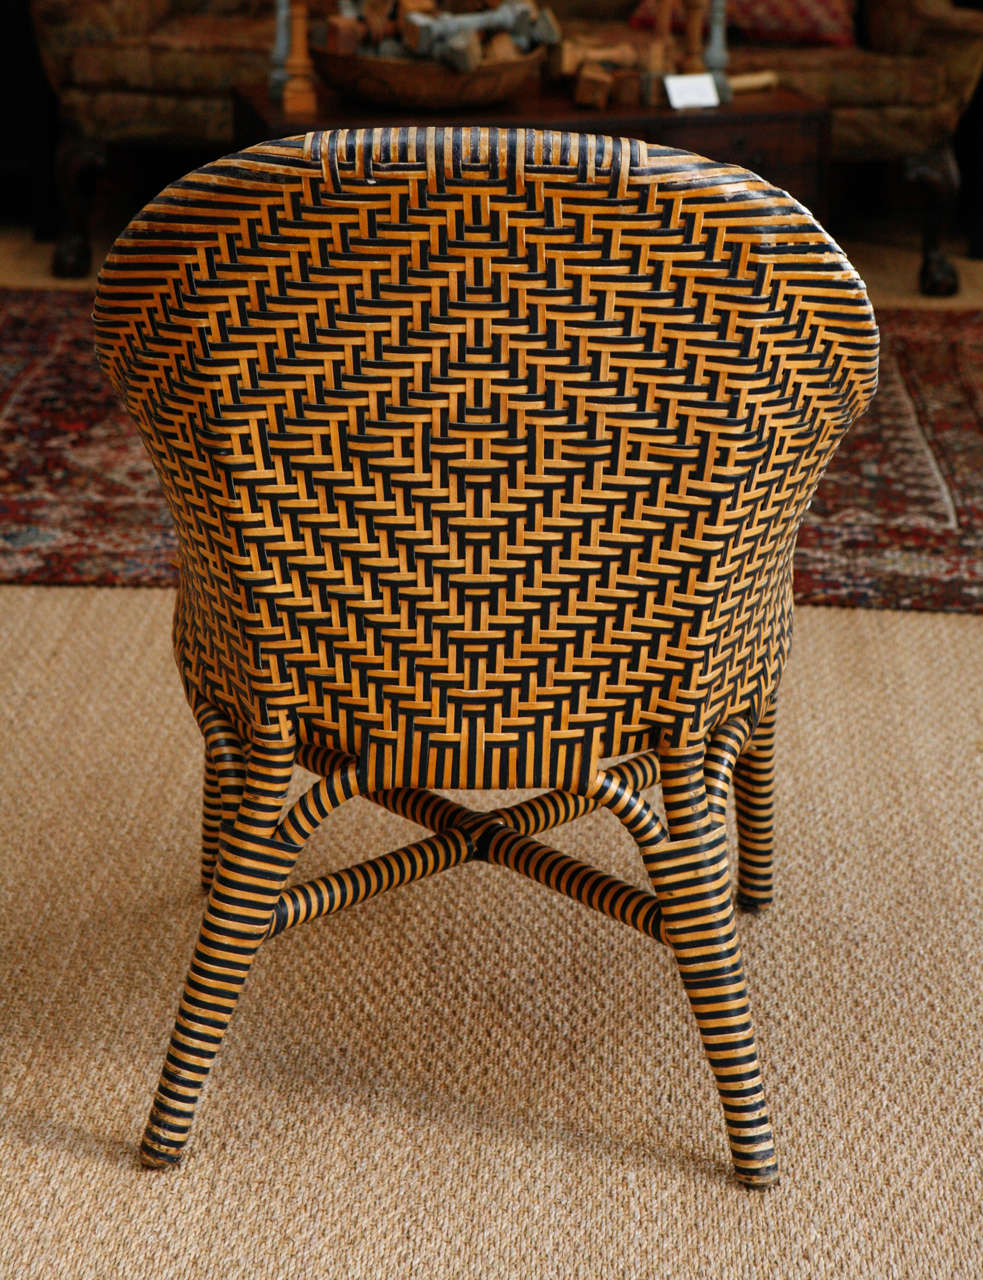 Woven Leather Chairs with Kuba Cloth Seats 4